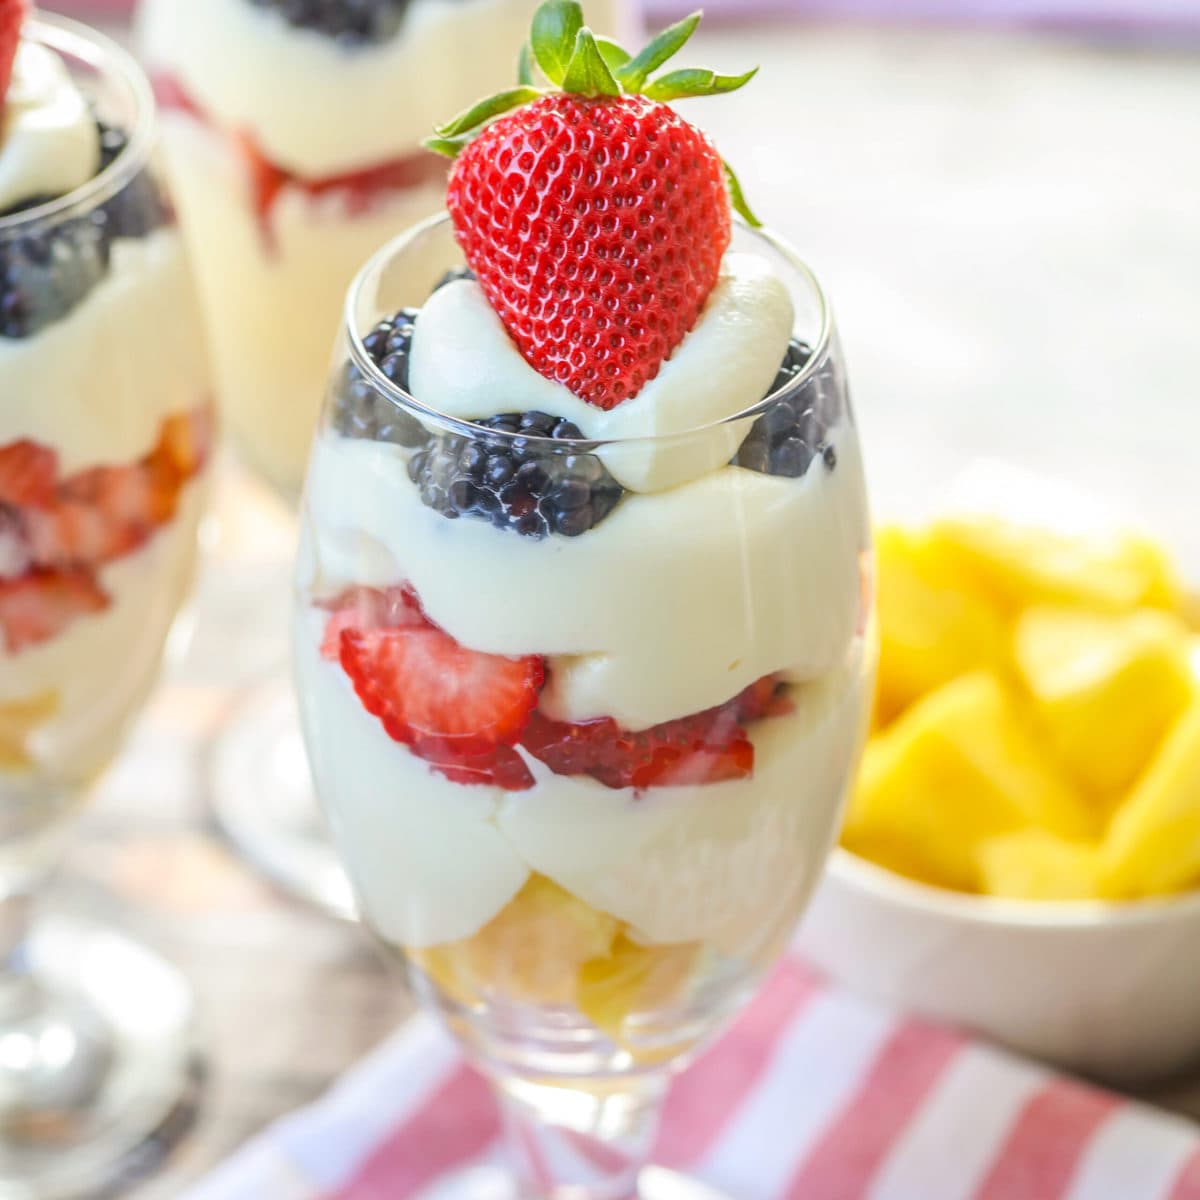 A dessert parfait layered and served in a glass and topped with a fresh strawberry.